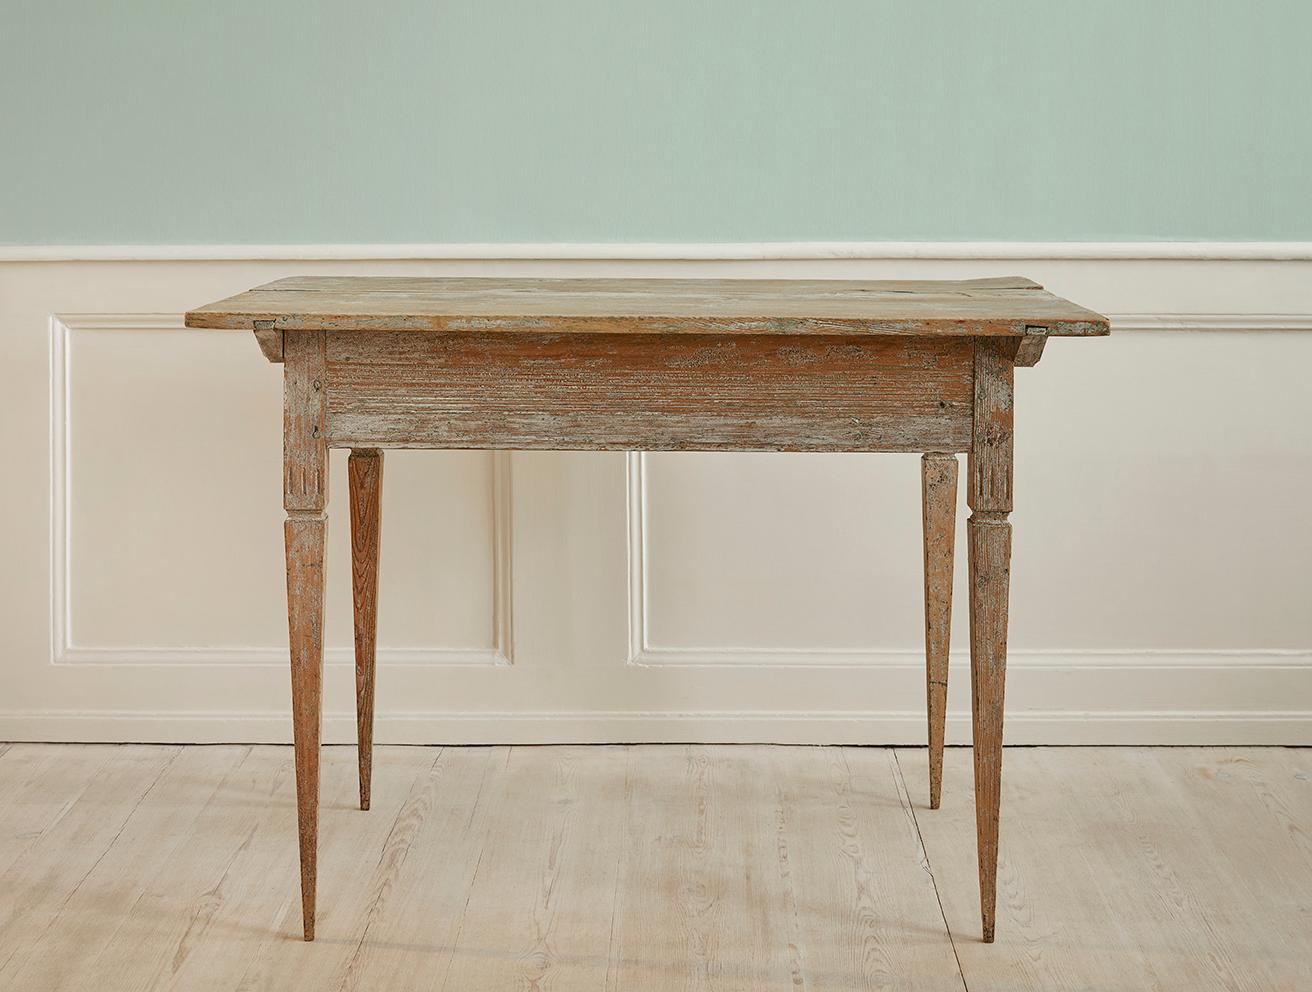 Sweden, late 18th century.

Gustavian pine table with tones of white and green.

Measures: H 76 x W 108 x D 69 cm.